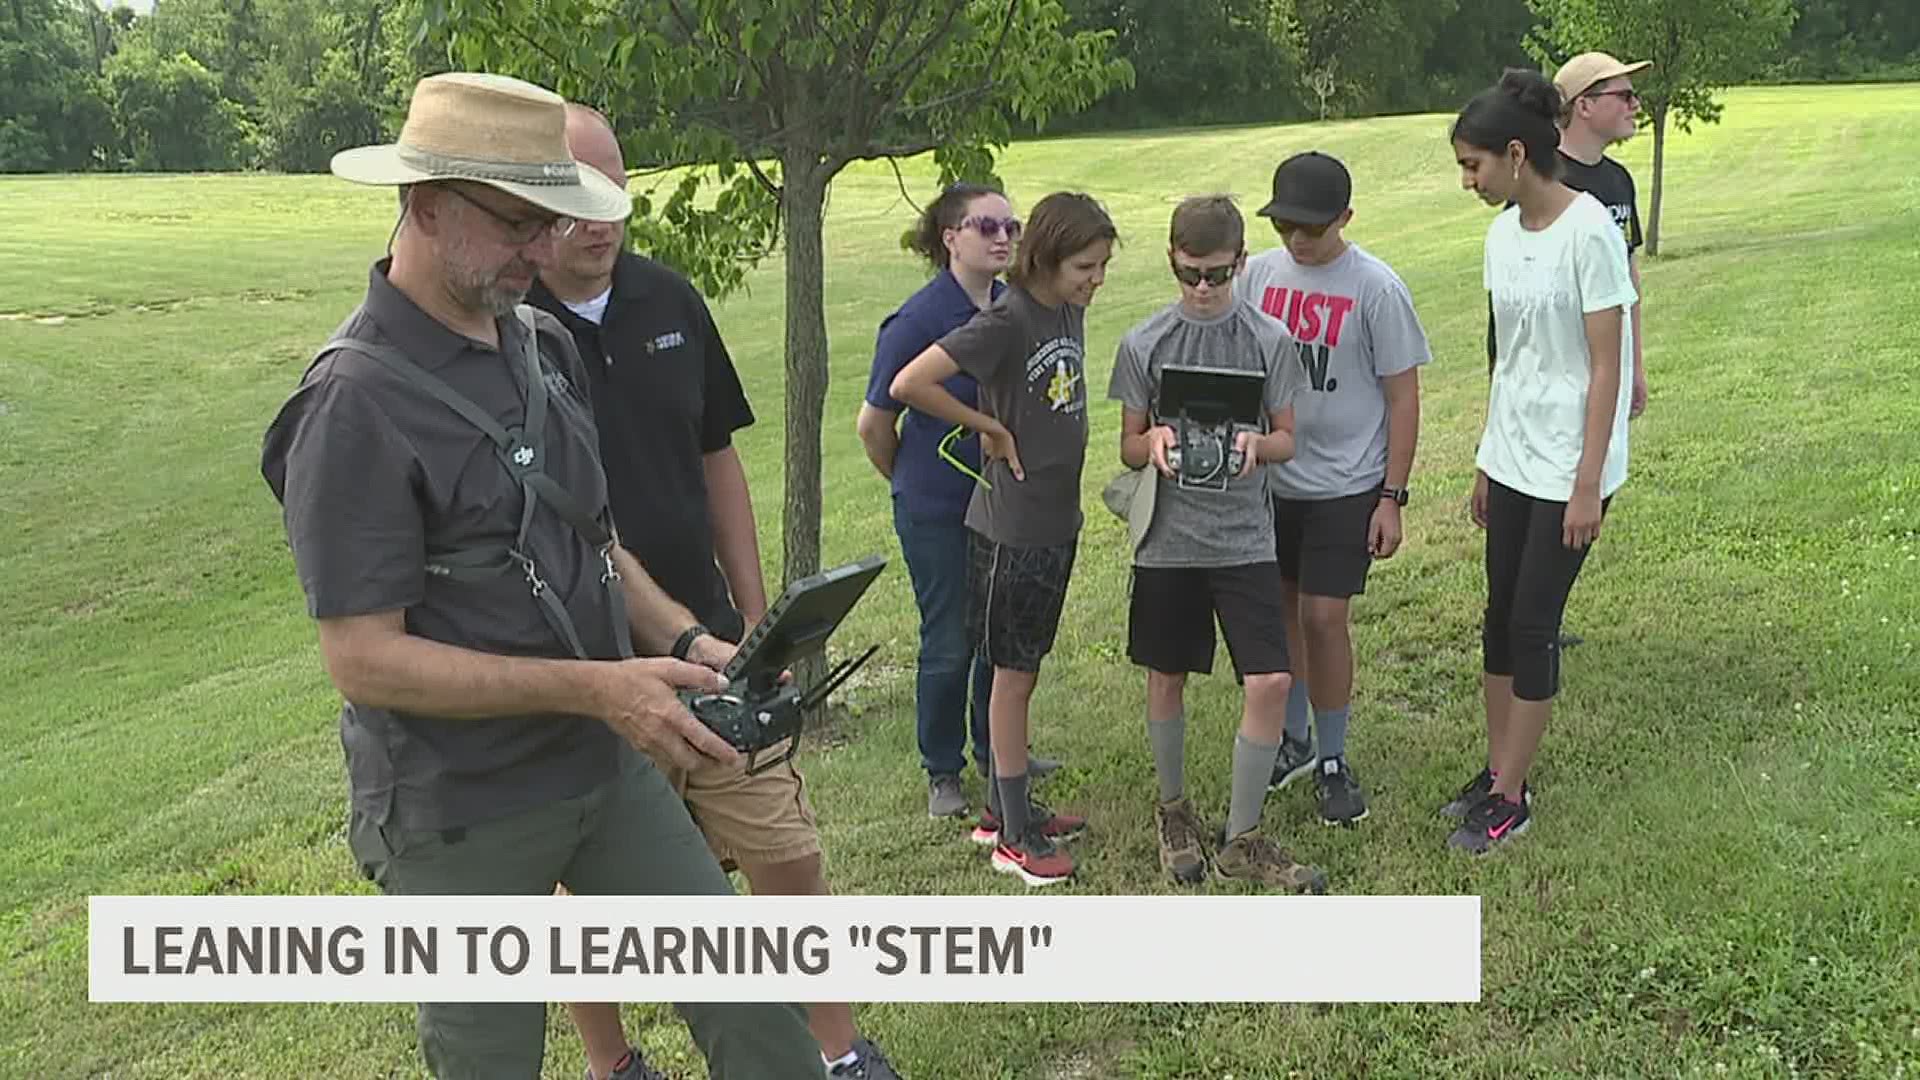 Harrisburg University of Science and Technology is hosting in person and online exploration programs this summer involving topics from Video Production to Aquaponics